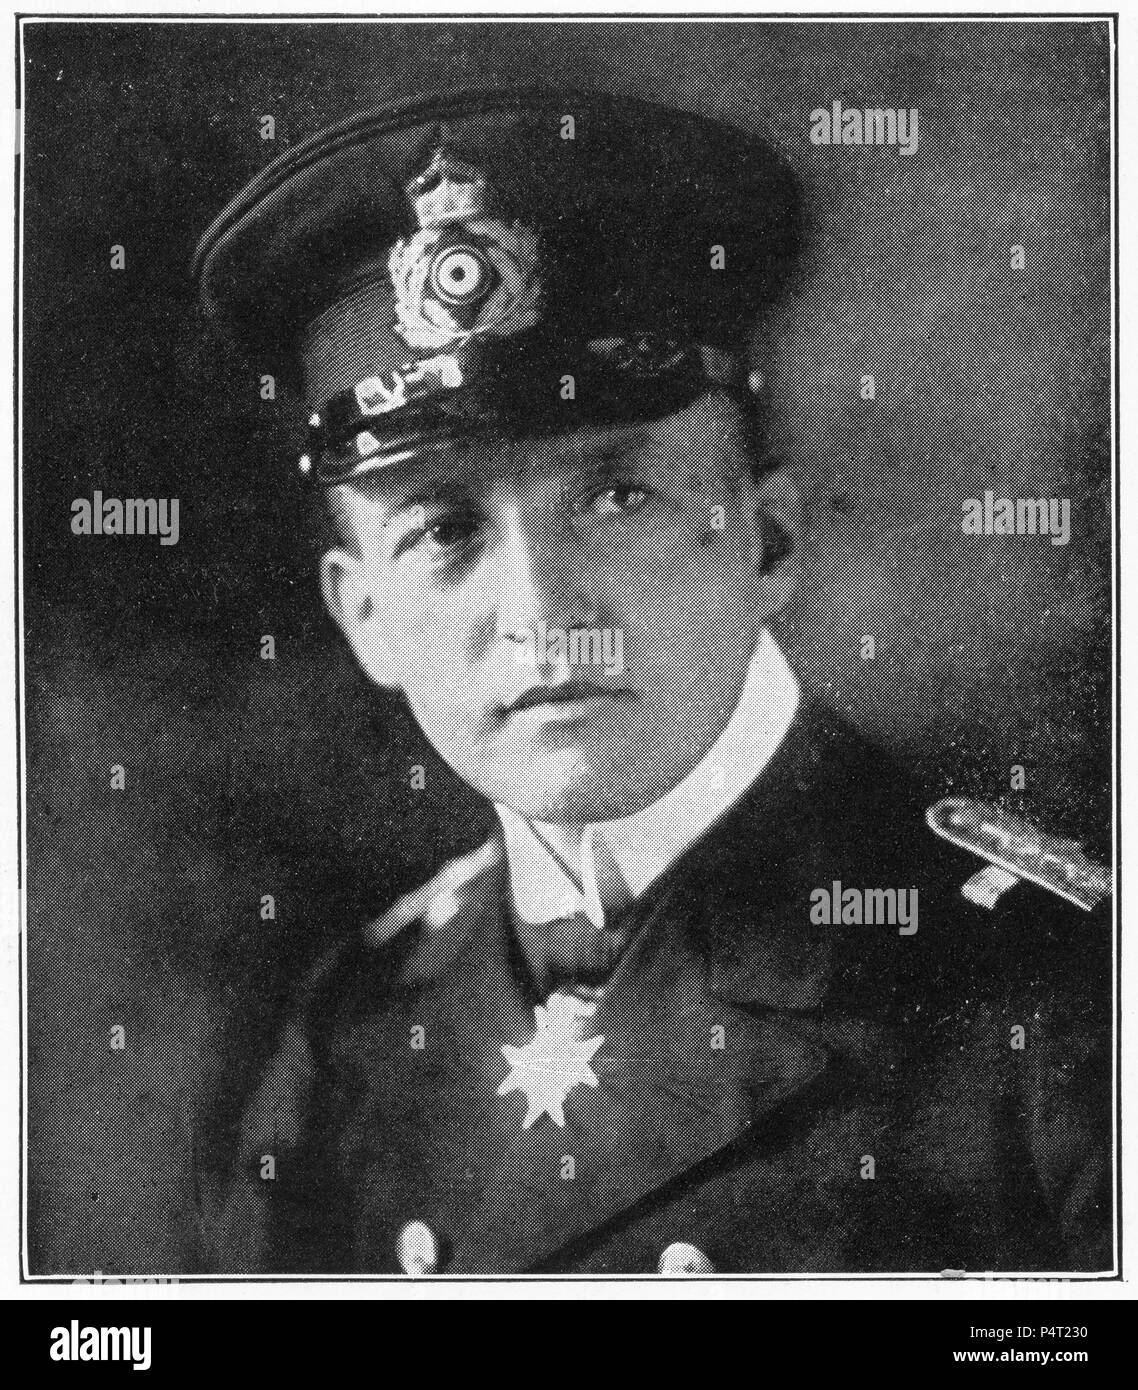 Halftone portrait of German naval officer Walther Schweiger, commander of U-20, the submarine which sank the Lusitania. Stock Photo